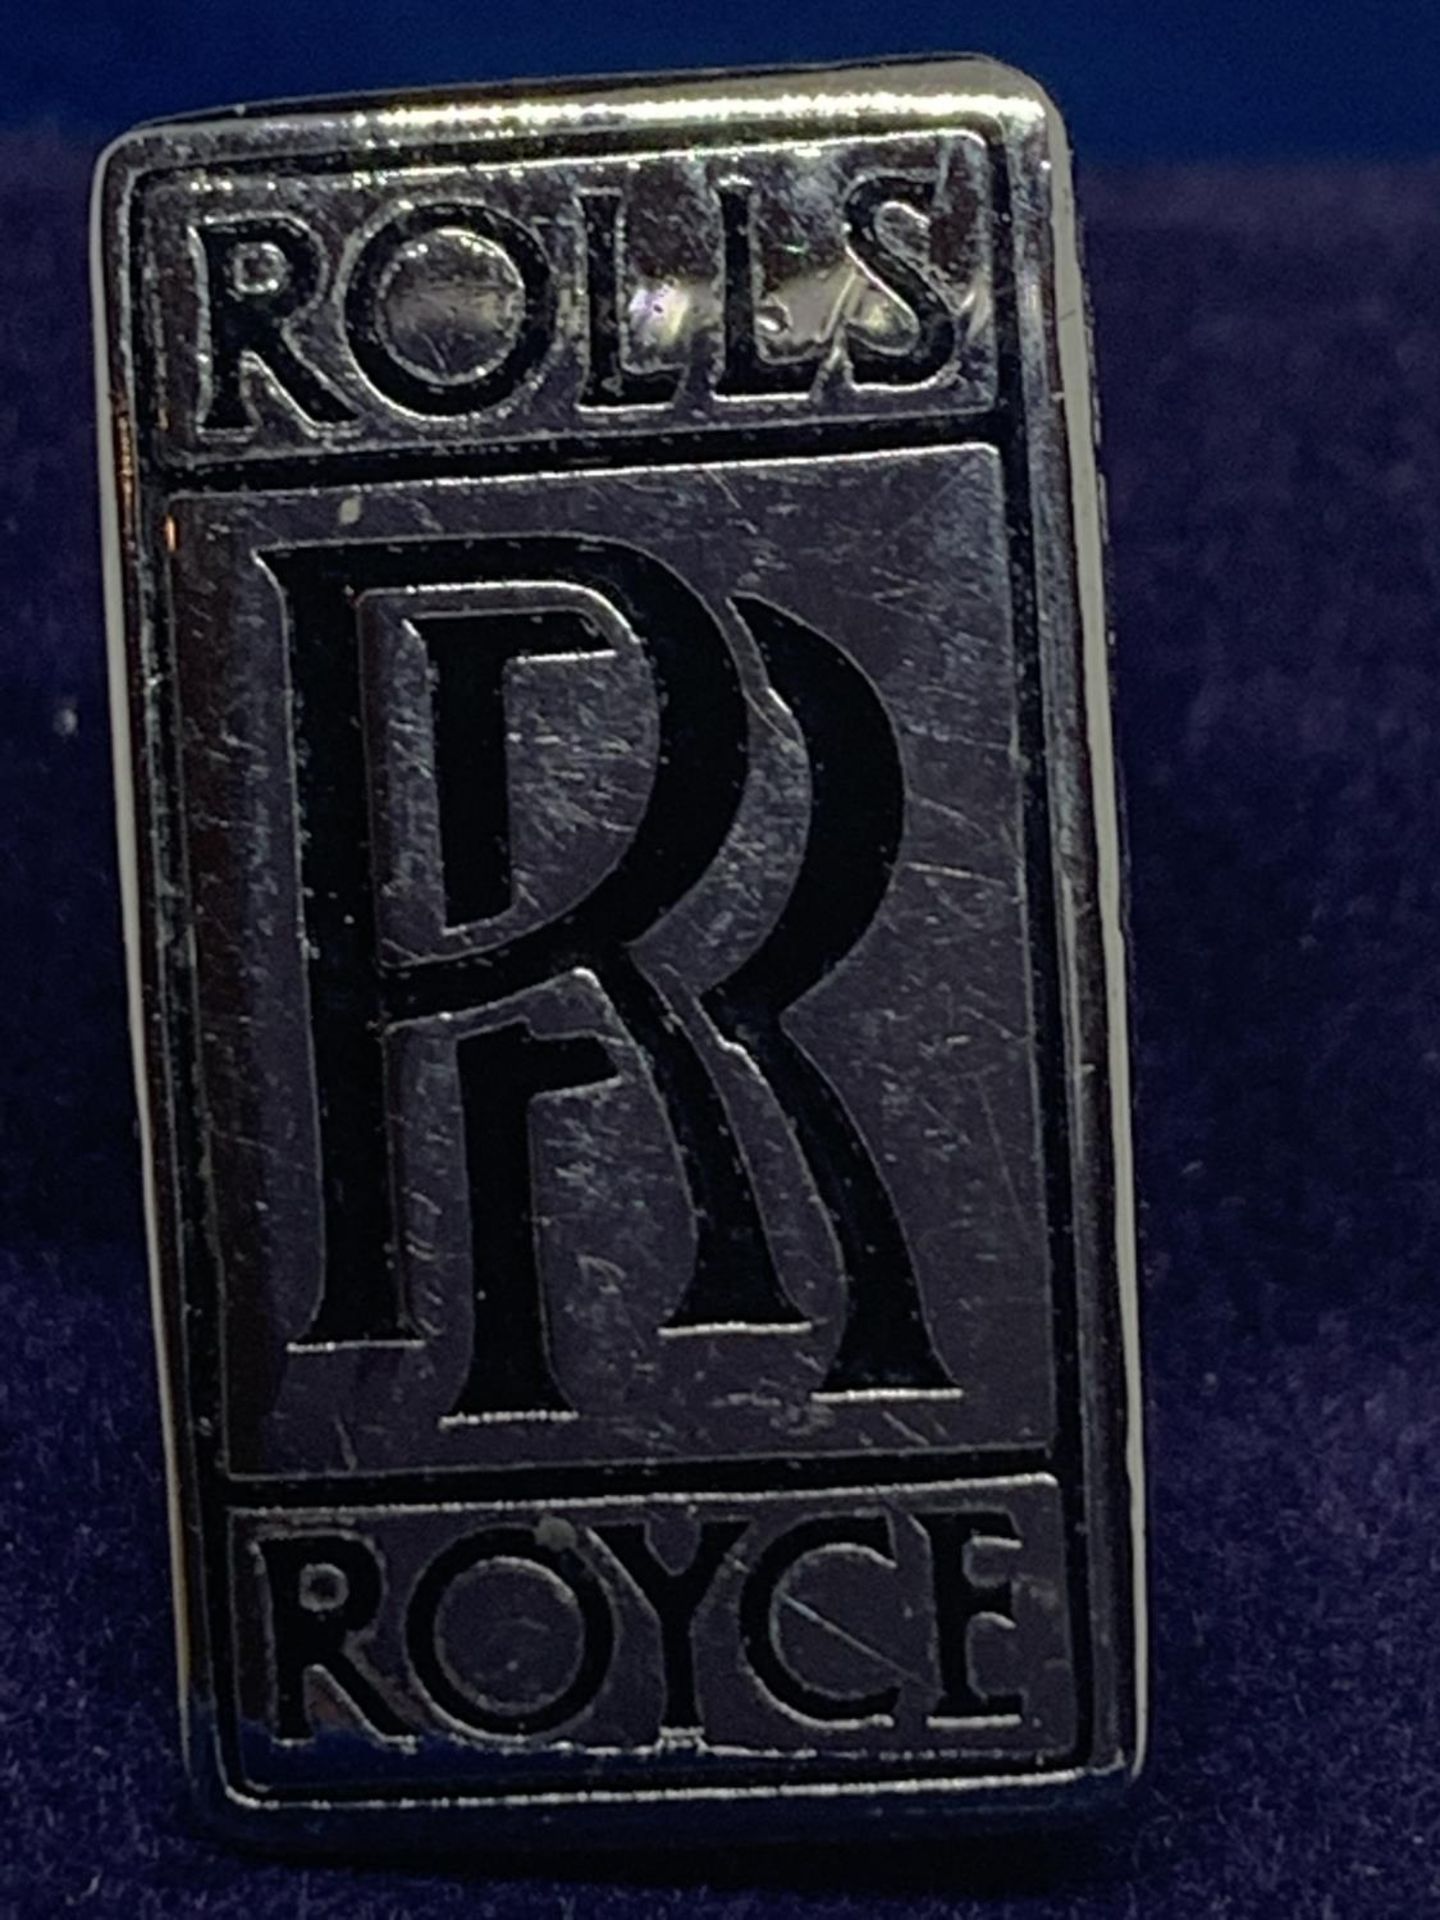 TWO ROLLS ROYCE BADGES IN A PRESENTATION BOX - Image 3 of 3